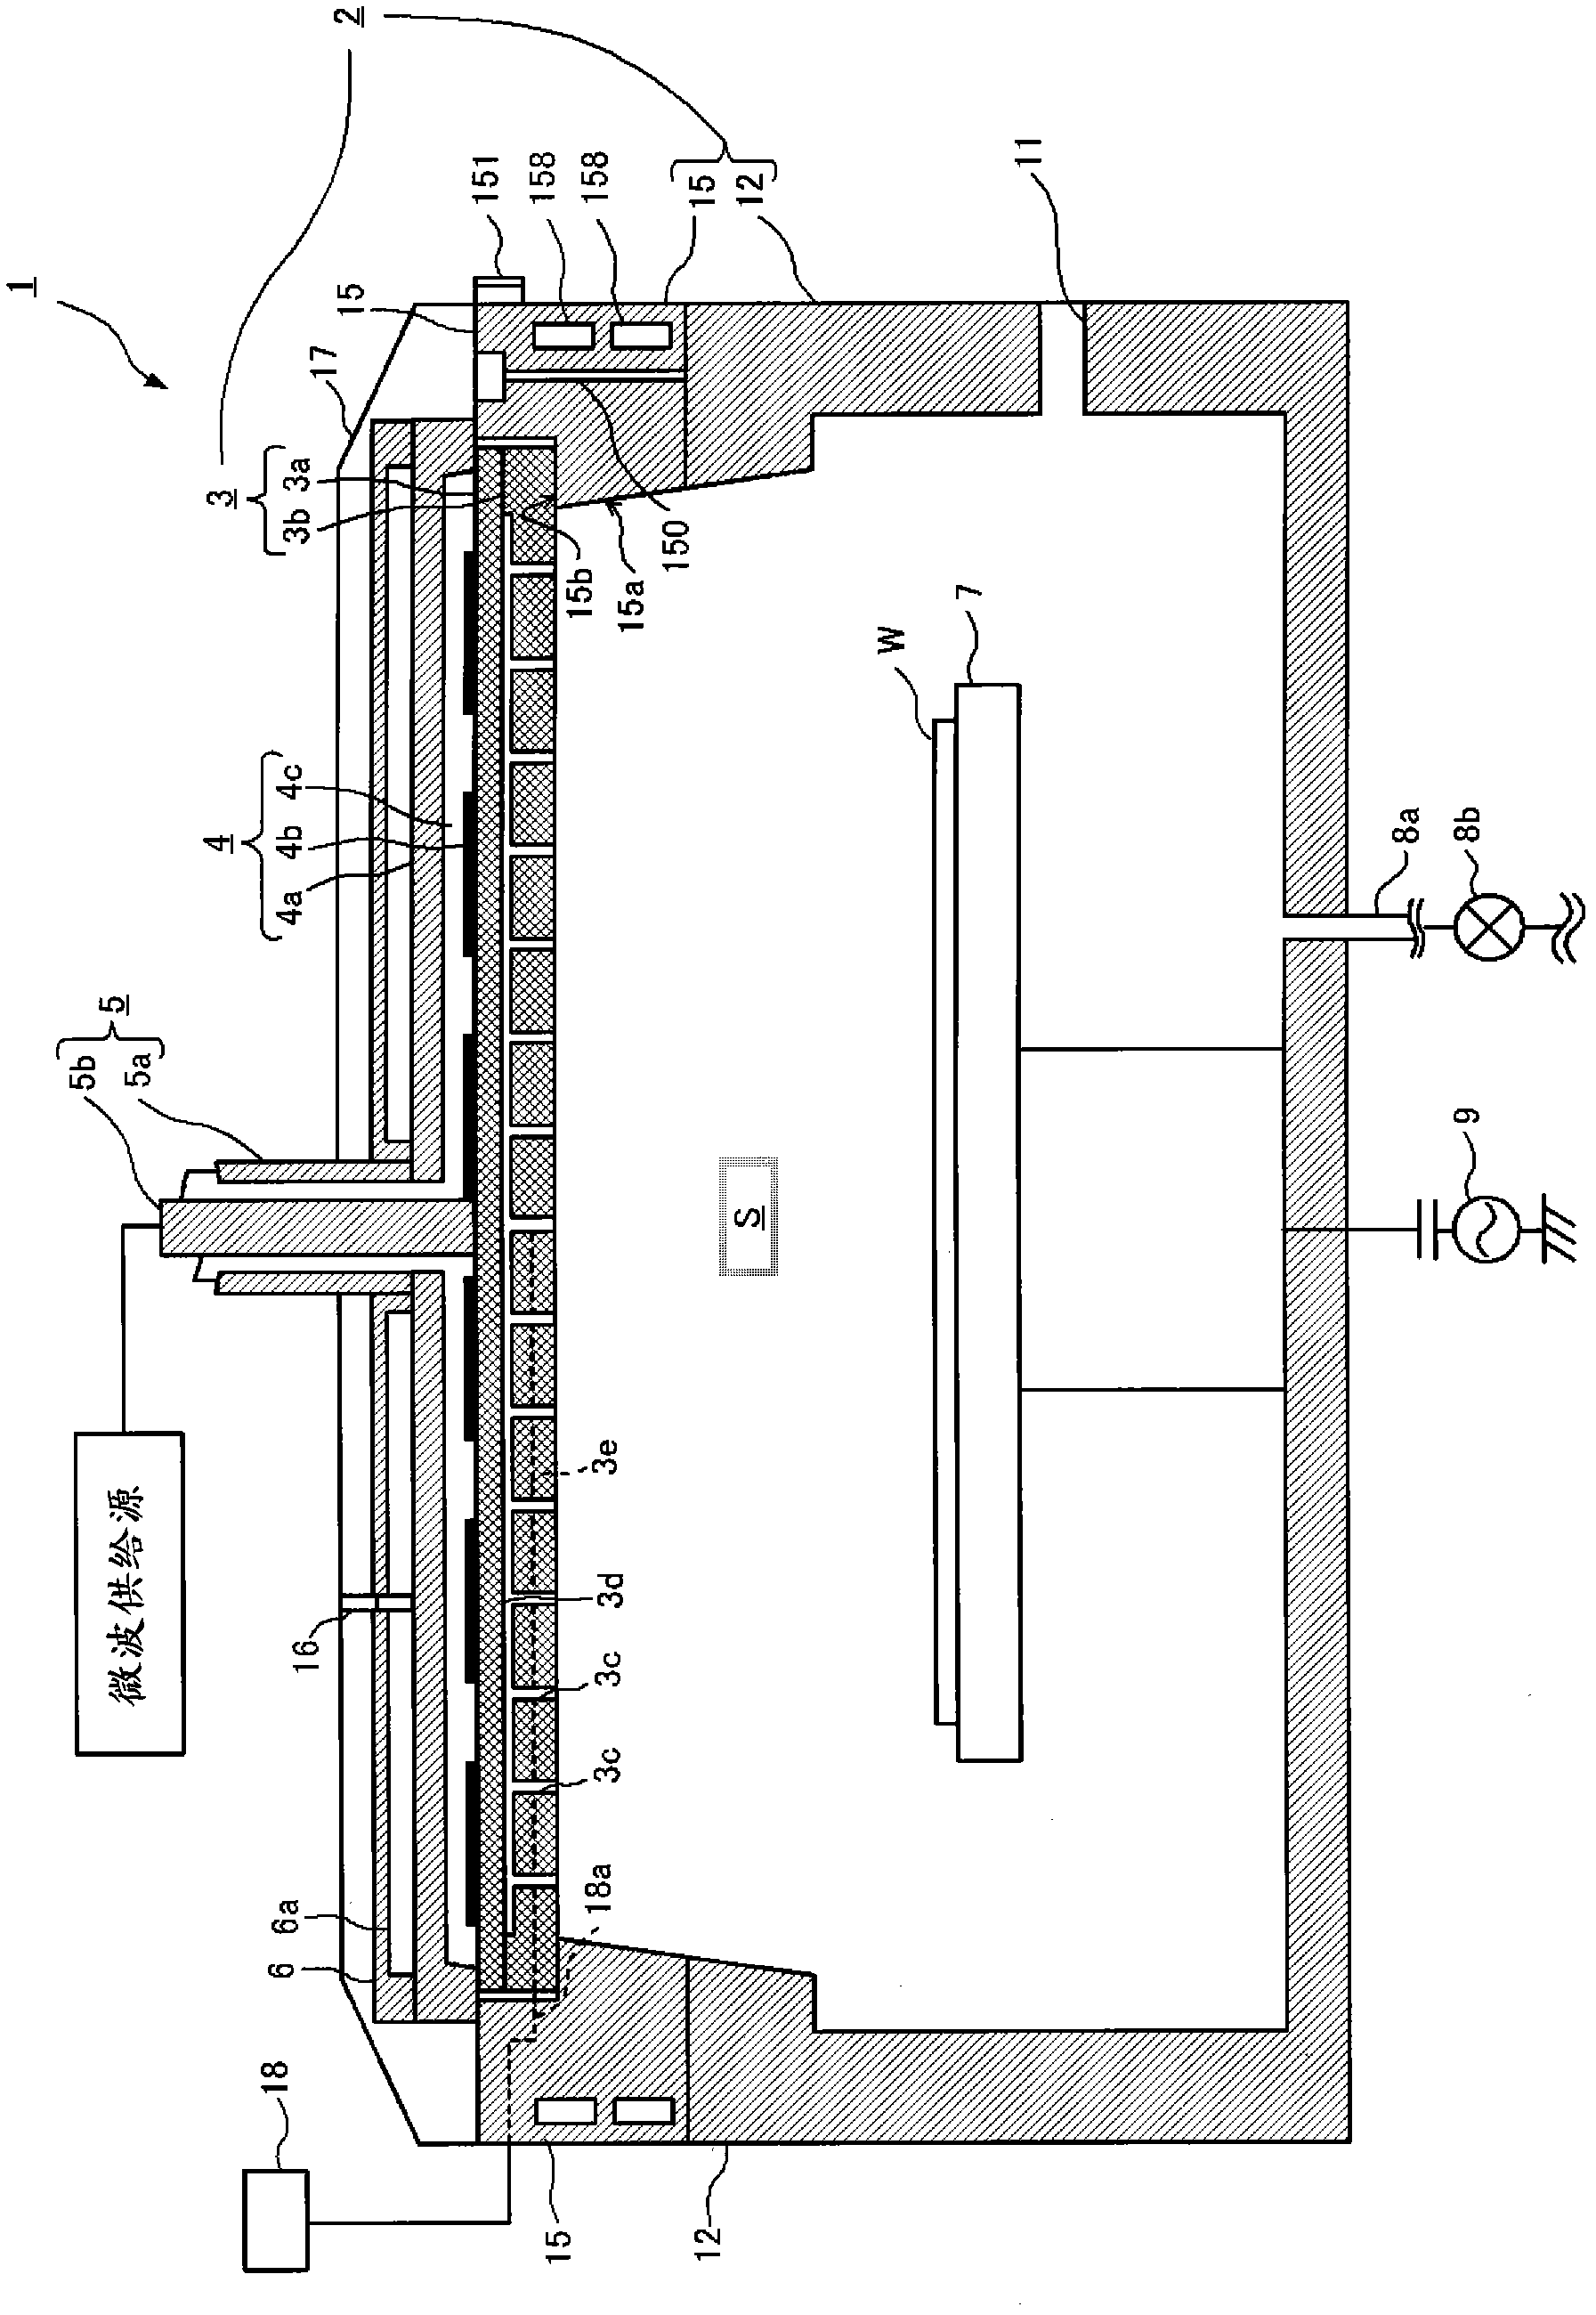 Plasma processing device, plasma processing method, and mechanism for regulating temperature of dielectric window